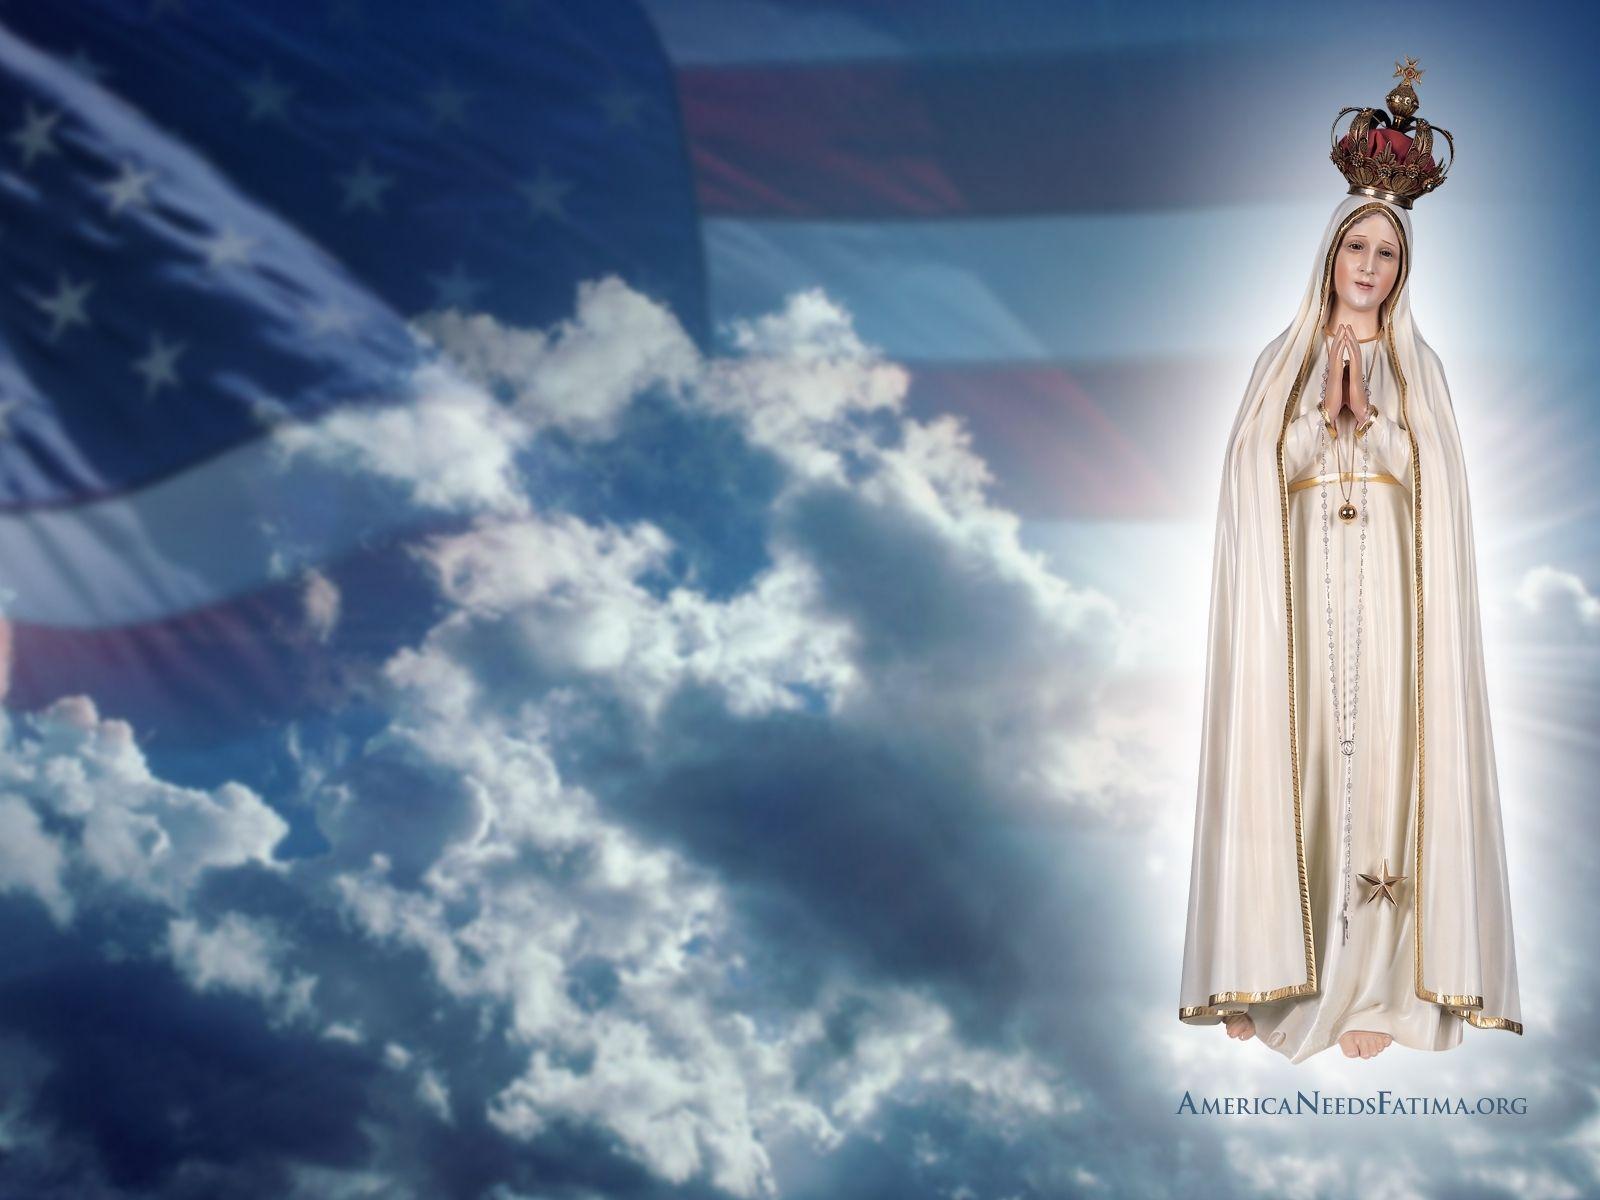 10 Latest Our Lady Of Fatima Wallpapers FULL HD 1920×1080 For PC